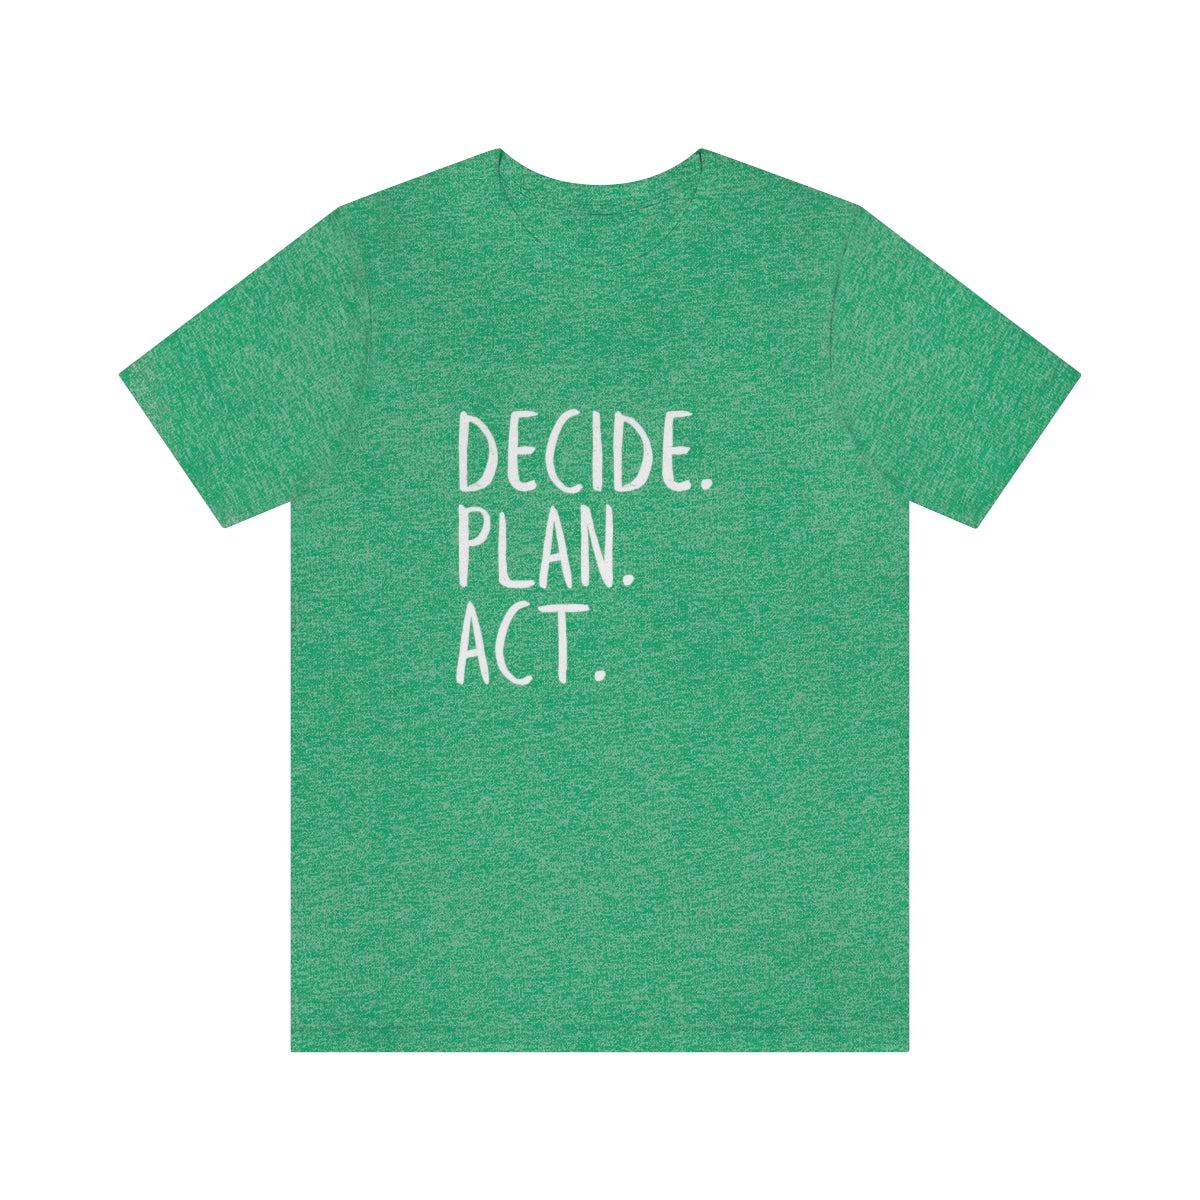 Best Motivation T Shirt, Decide, Plan, Act, Take Action Tees, Inspirational T-Shirt, Empowering Sayings, Inspo Gifts, Soft Tees